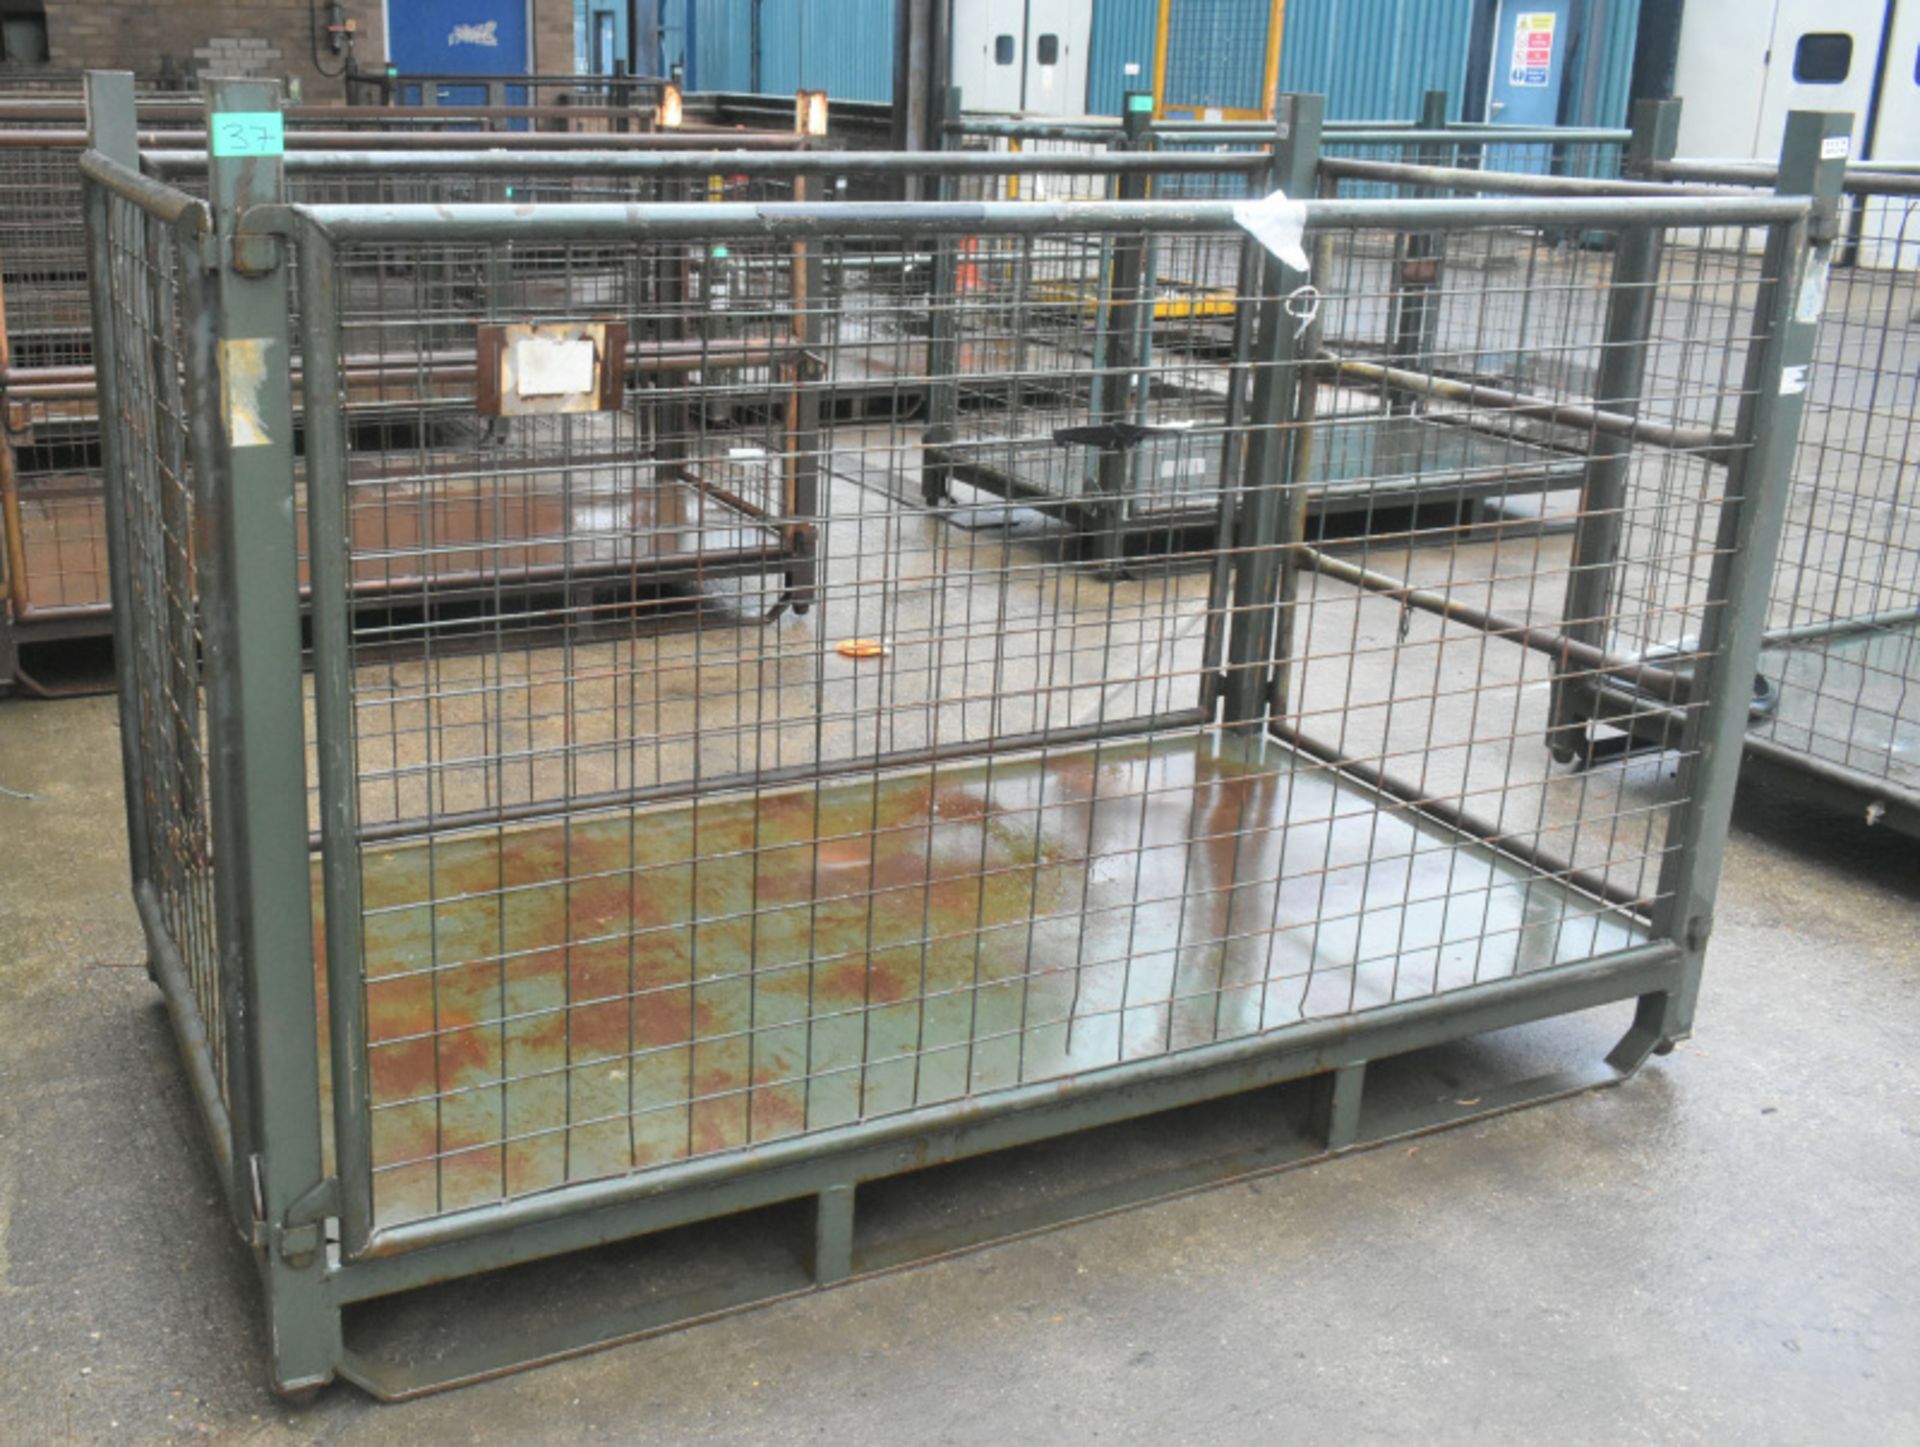 Longspan Metal Stillage - External dimensions L213 x W113 x H143cm - PLEASE SEE PICTURES FOR CONDITI